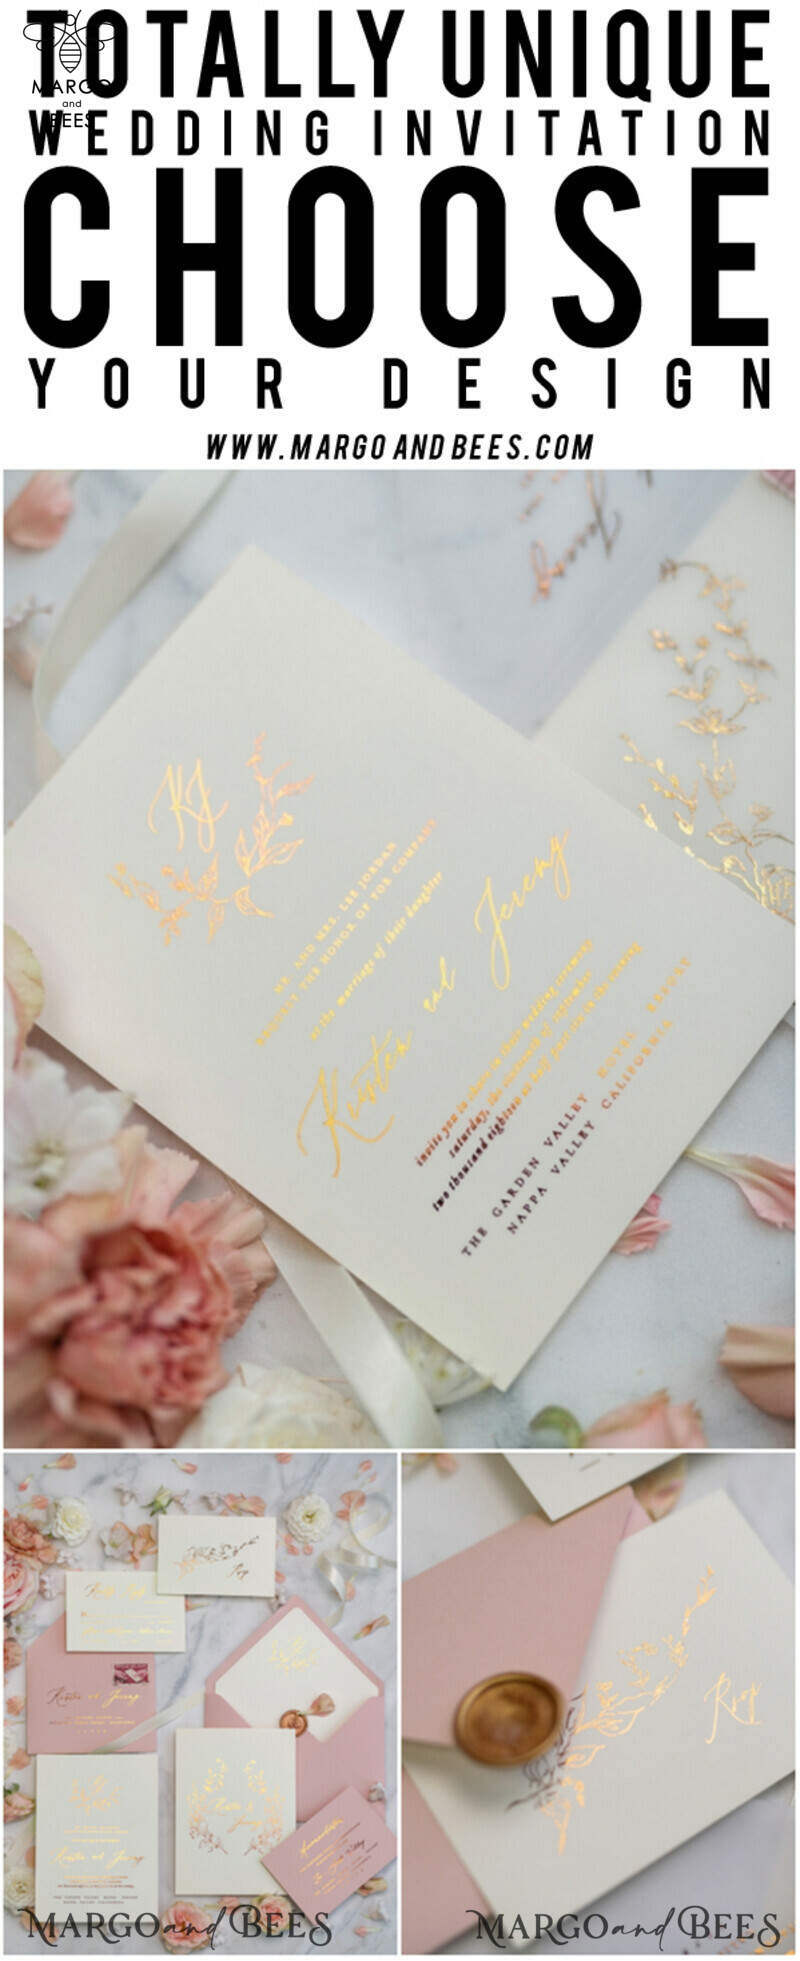 Bespoke Vellum Wedding Invitation Suite: Romantic Blush Pink and Glamour Gold Foil with Elegant Golden Touch-43